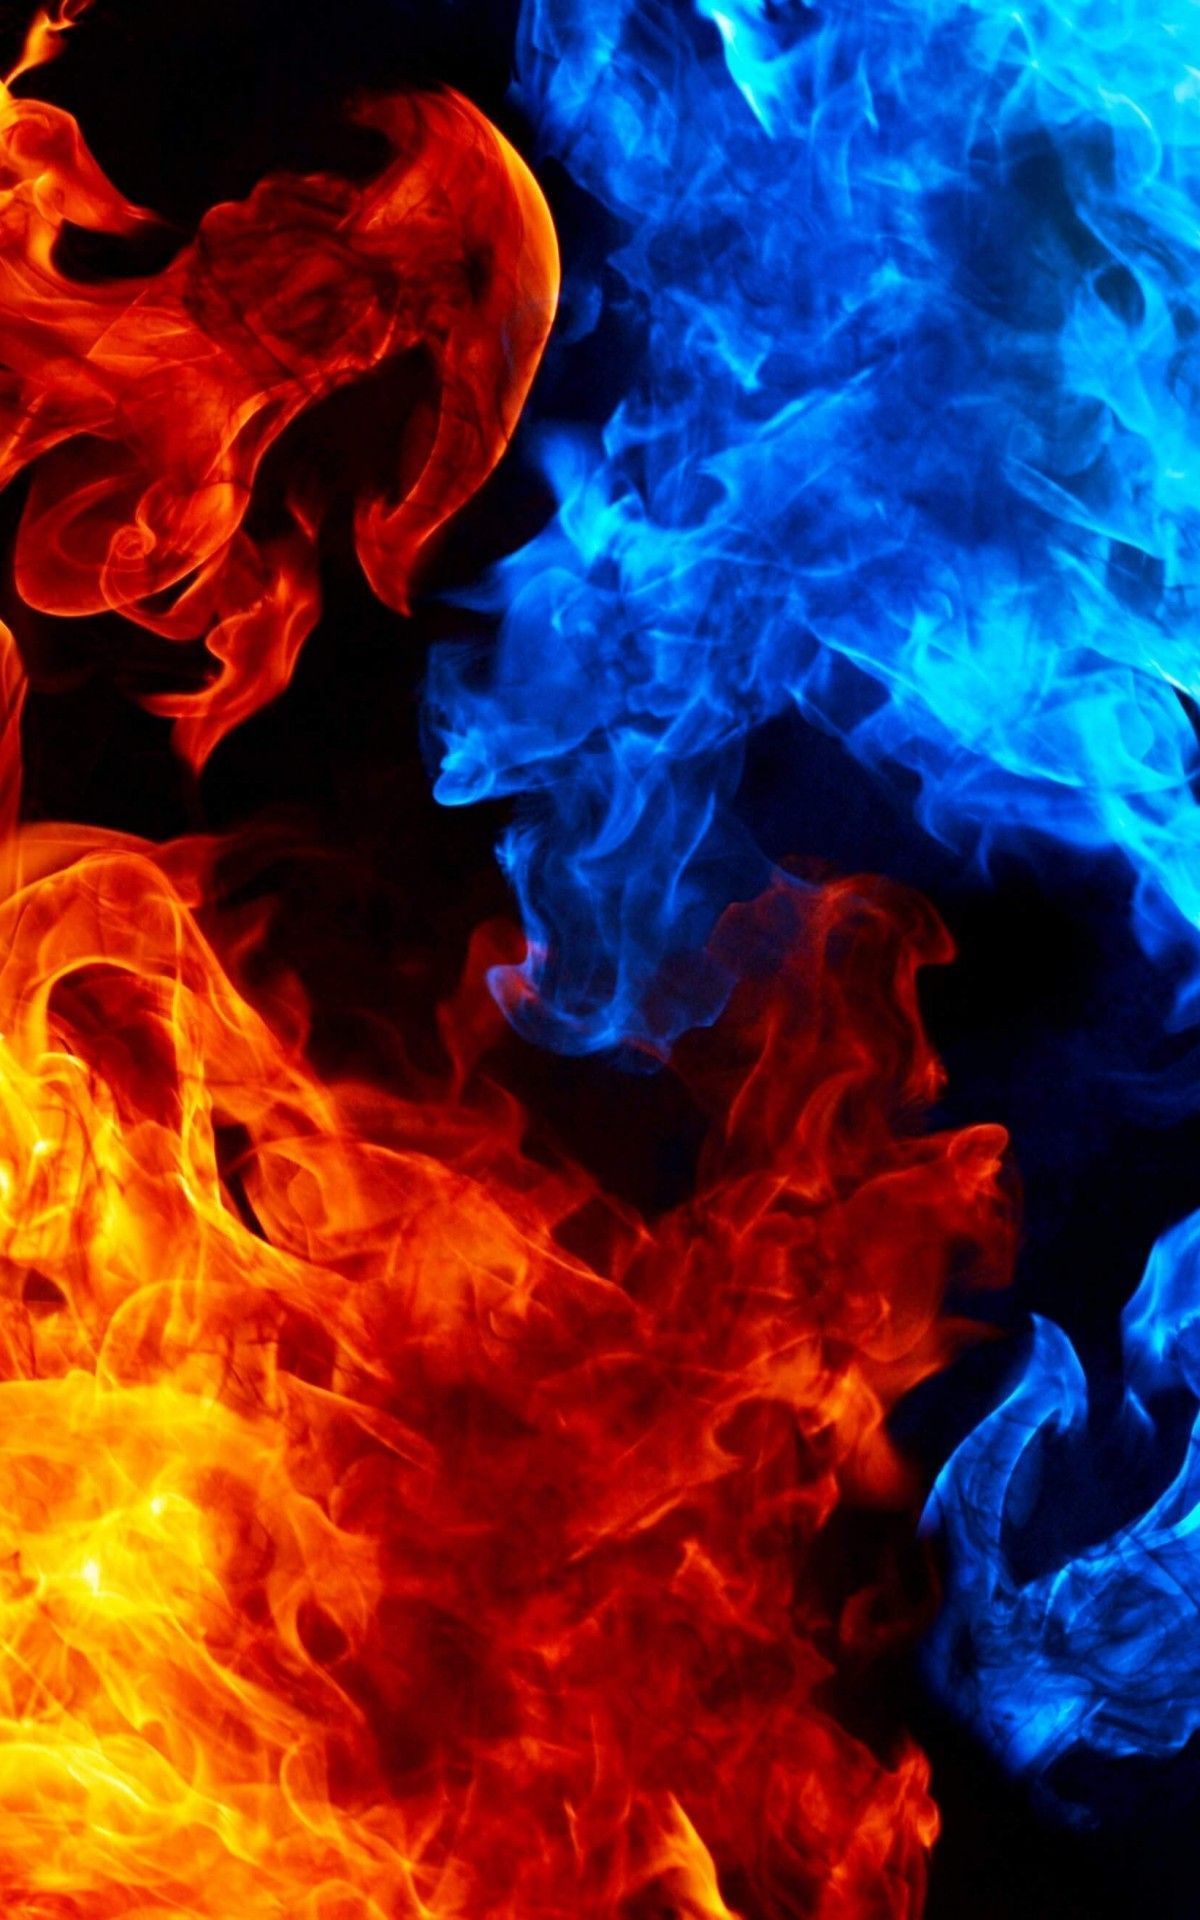 A collection of fire wallpapers - Fire, flames